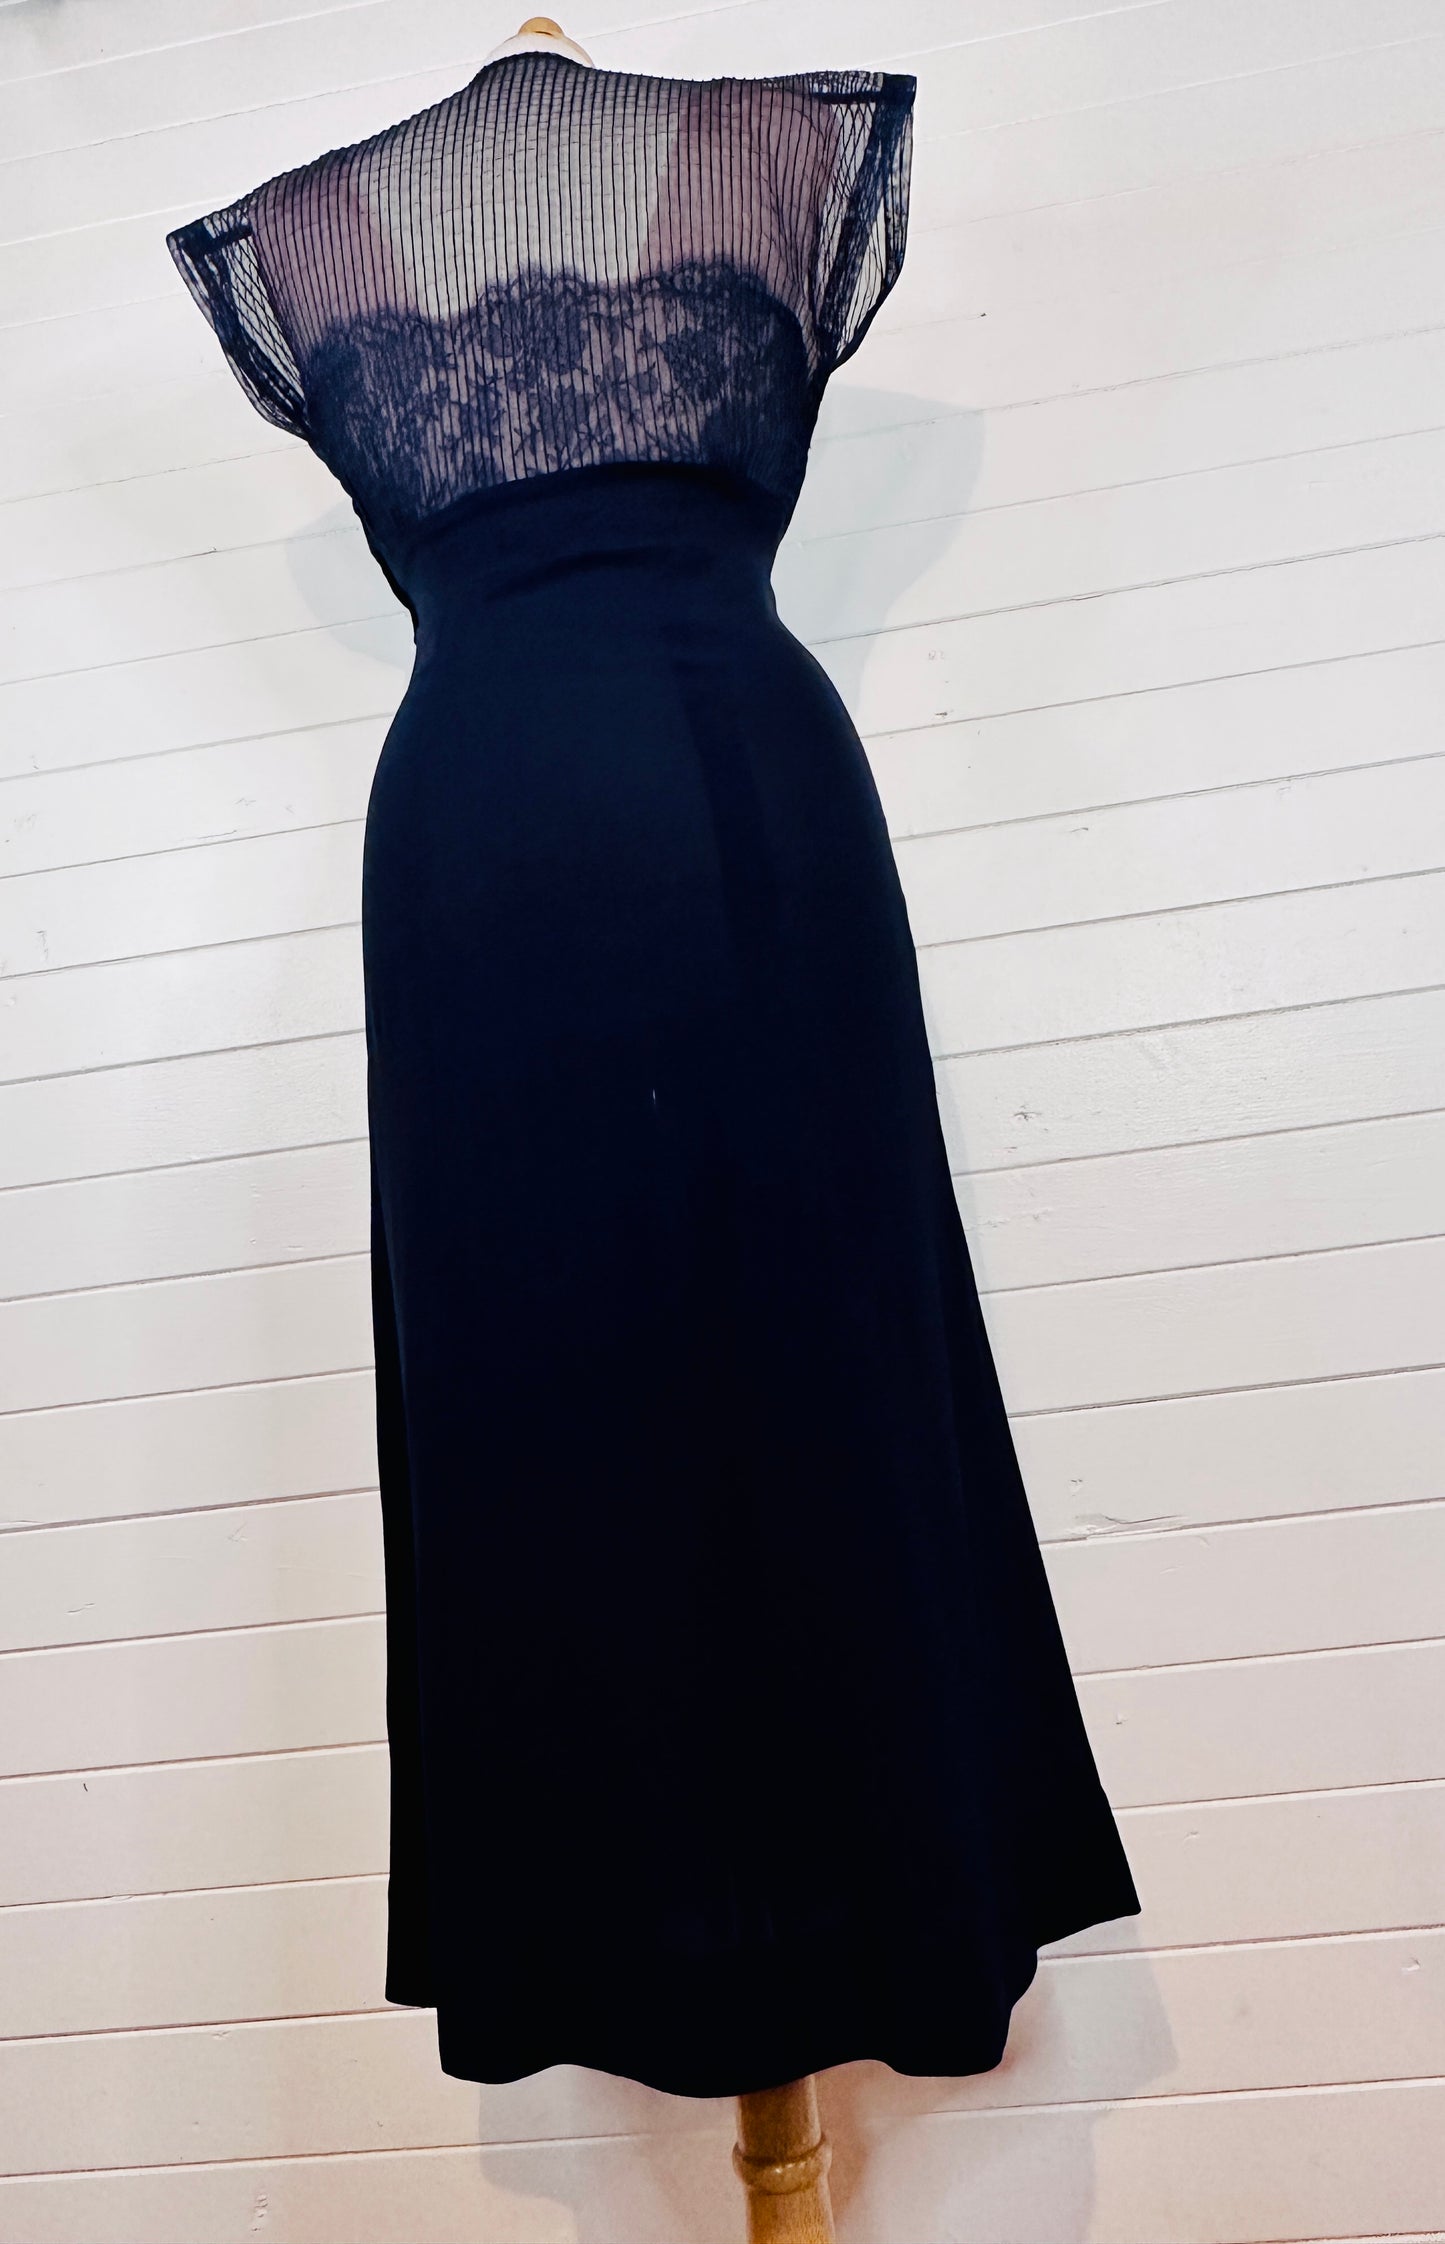 Early 1950's Frenchshire New Look Navy Crépe and Lace Cocktail Dress (M)